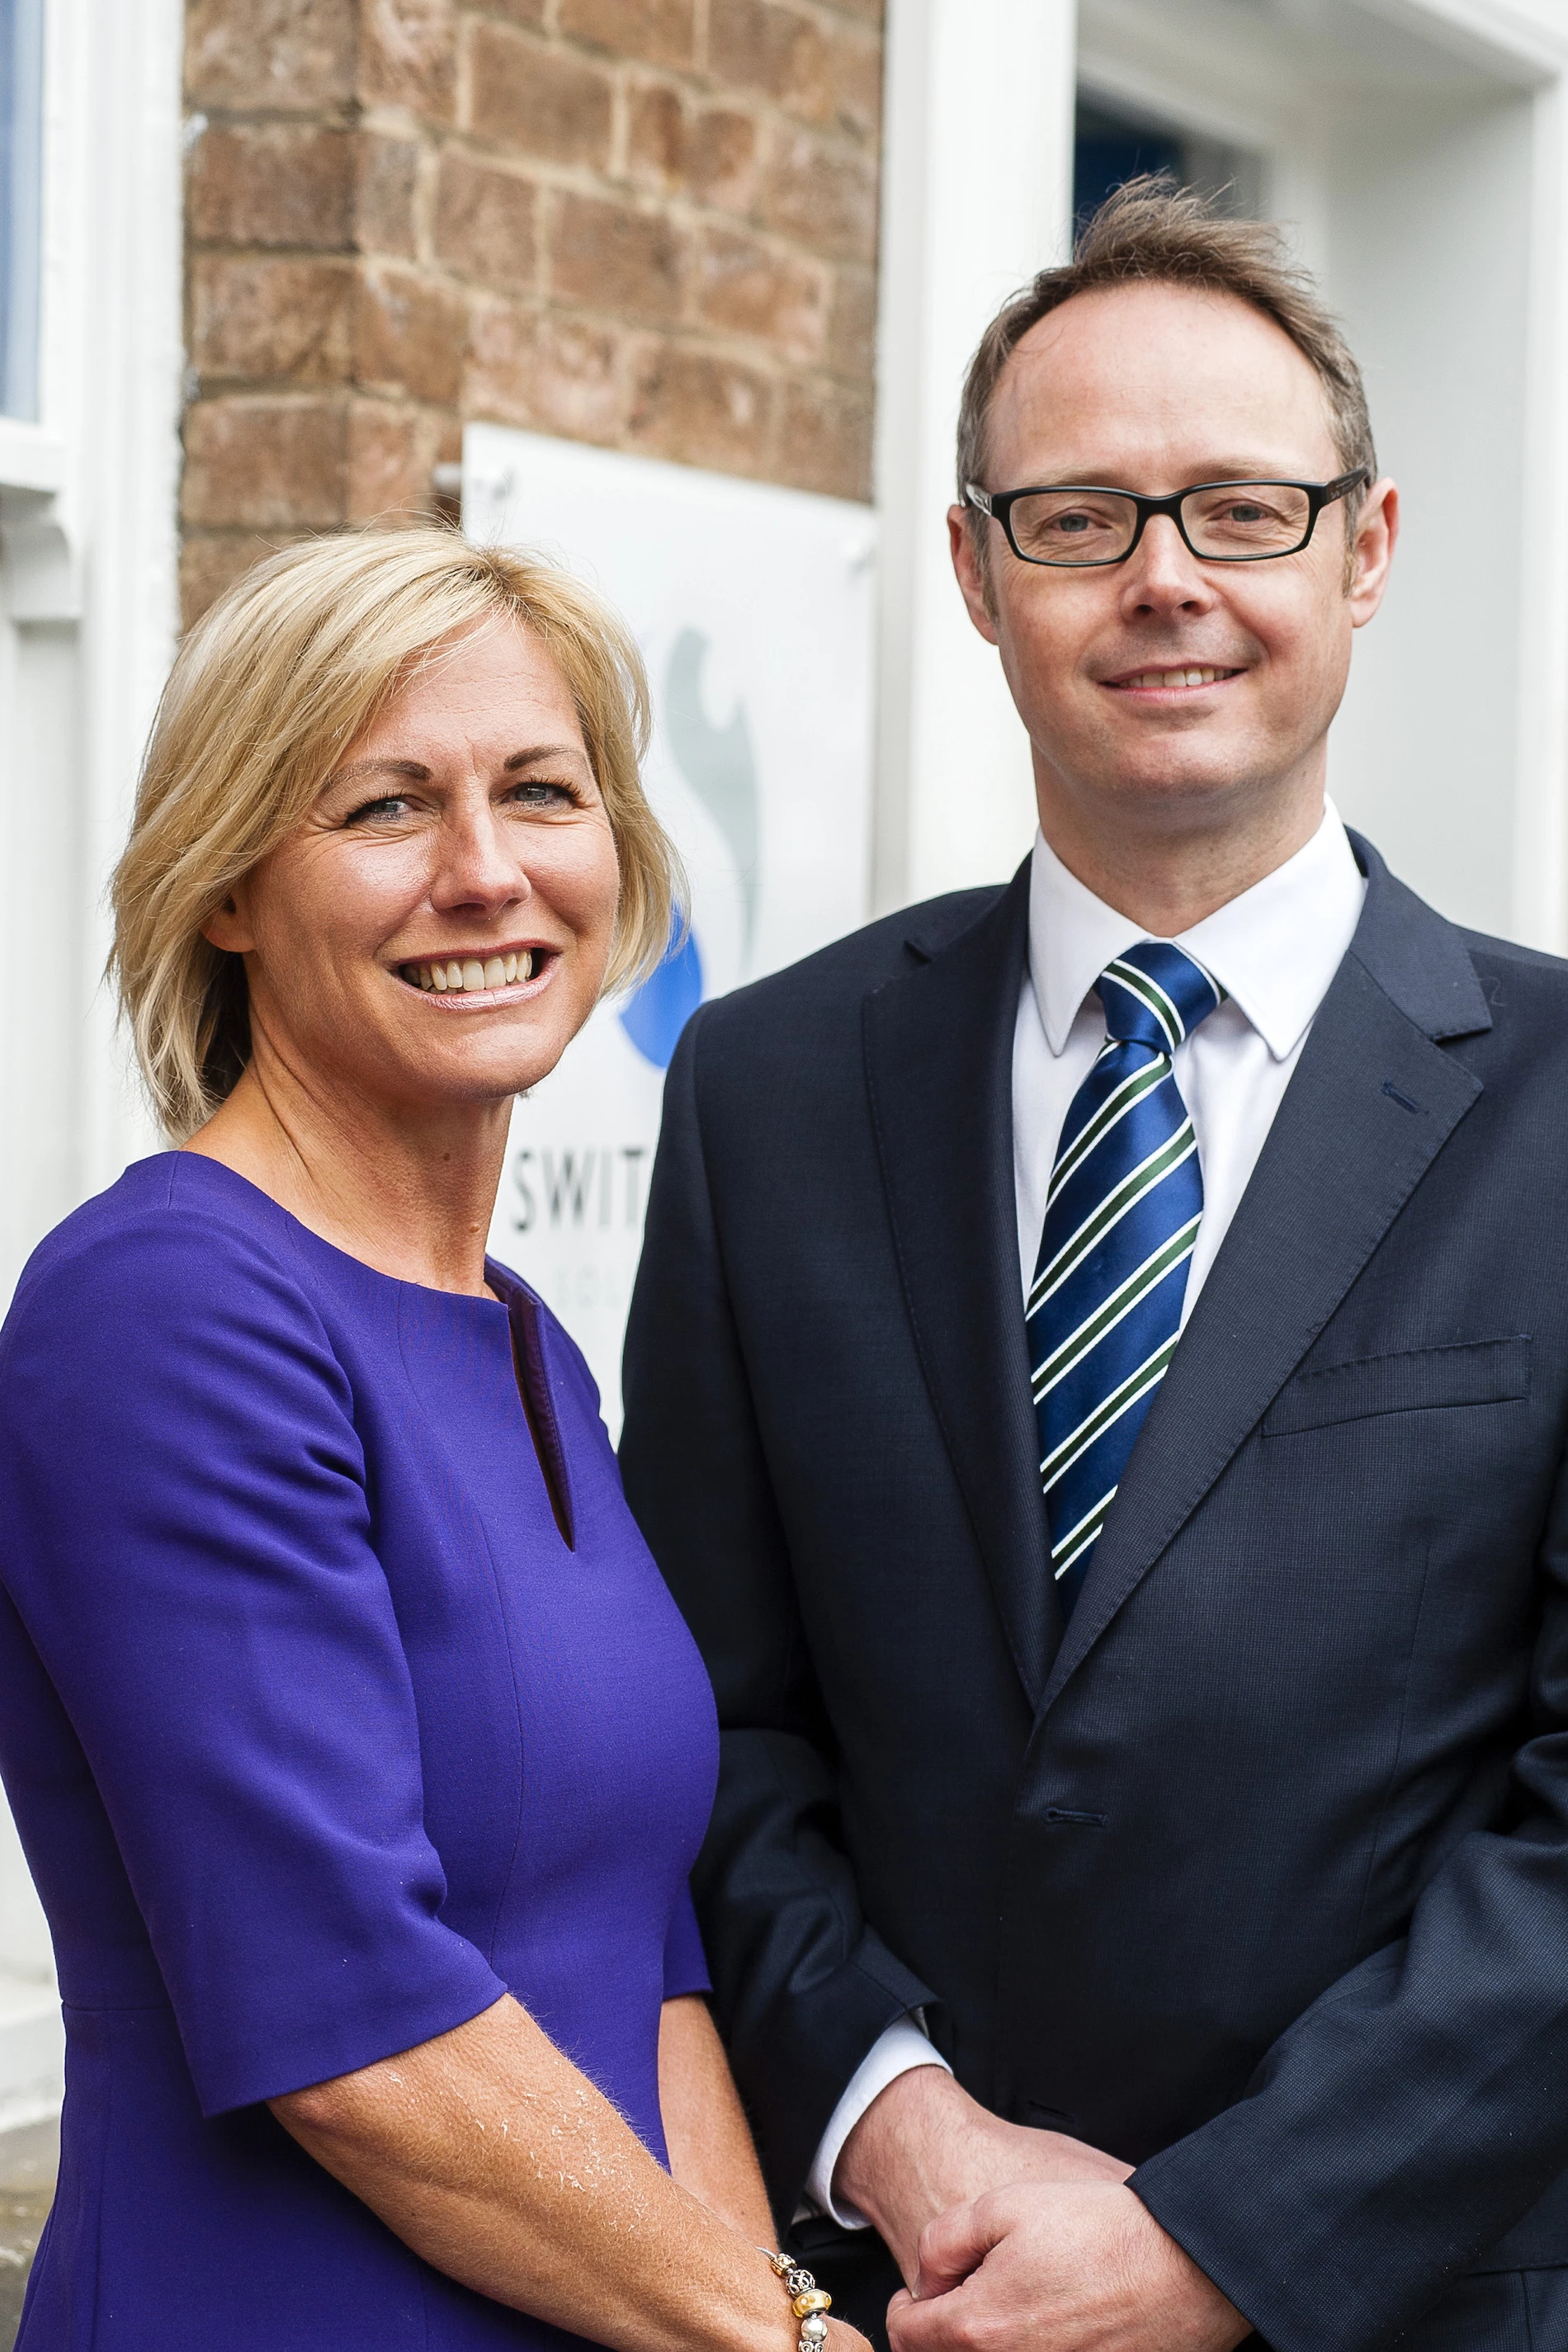 Alison Kitchman and Toby Netting, Switalskis Solicitors